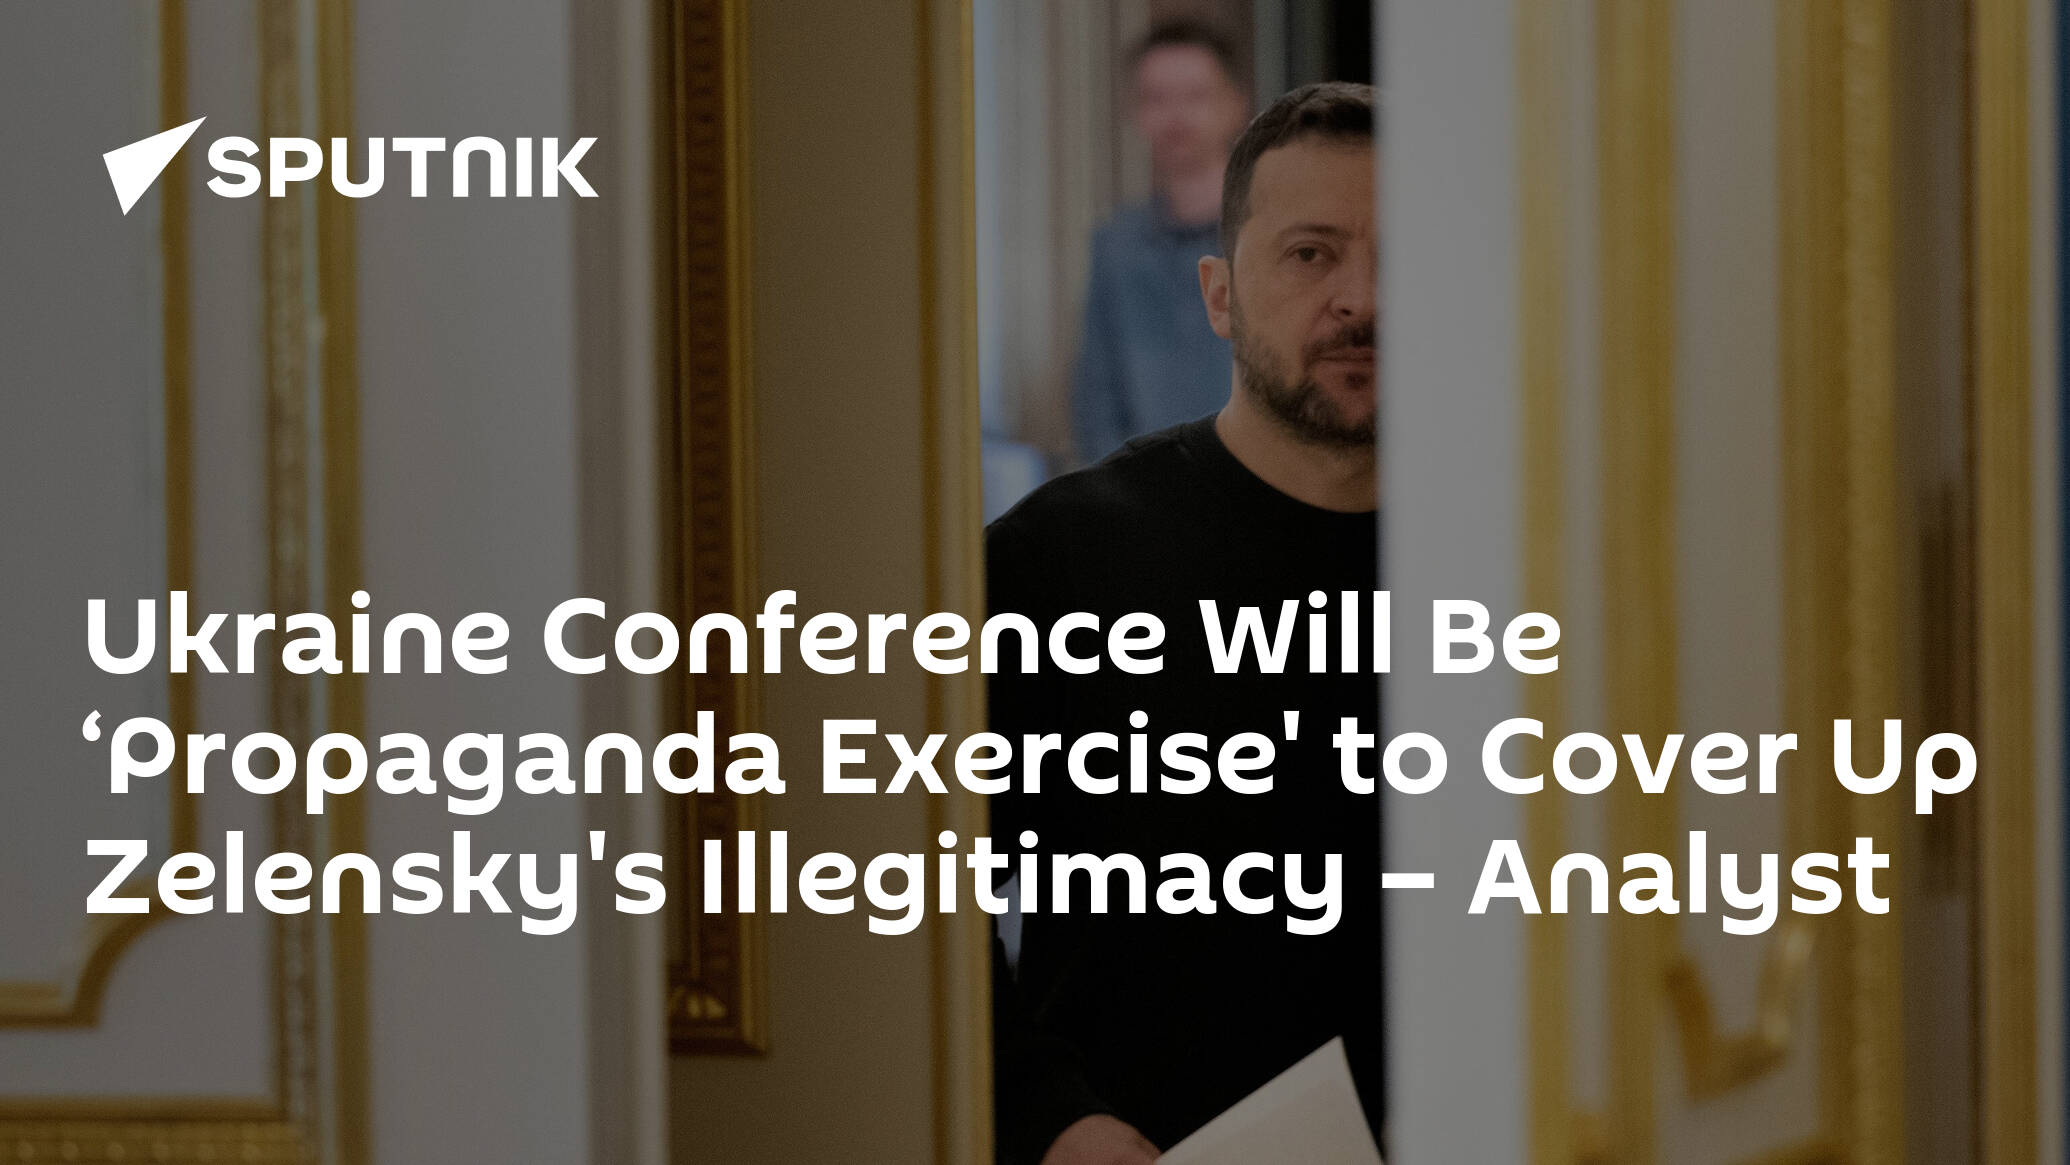 Ukraine onference Will Be Propaganda Exercise' to Cover Up Zelensky's